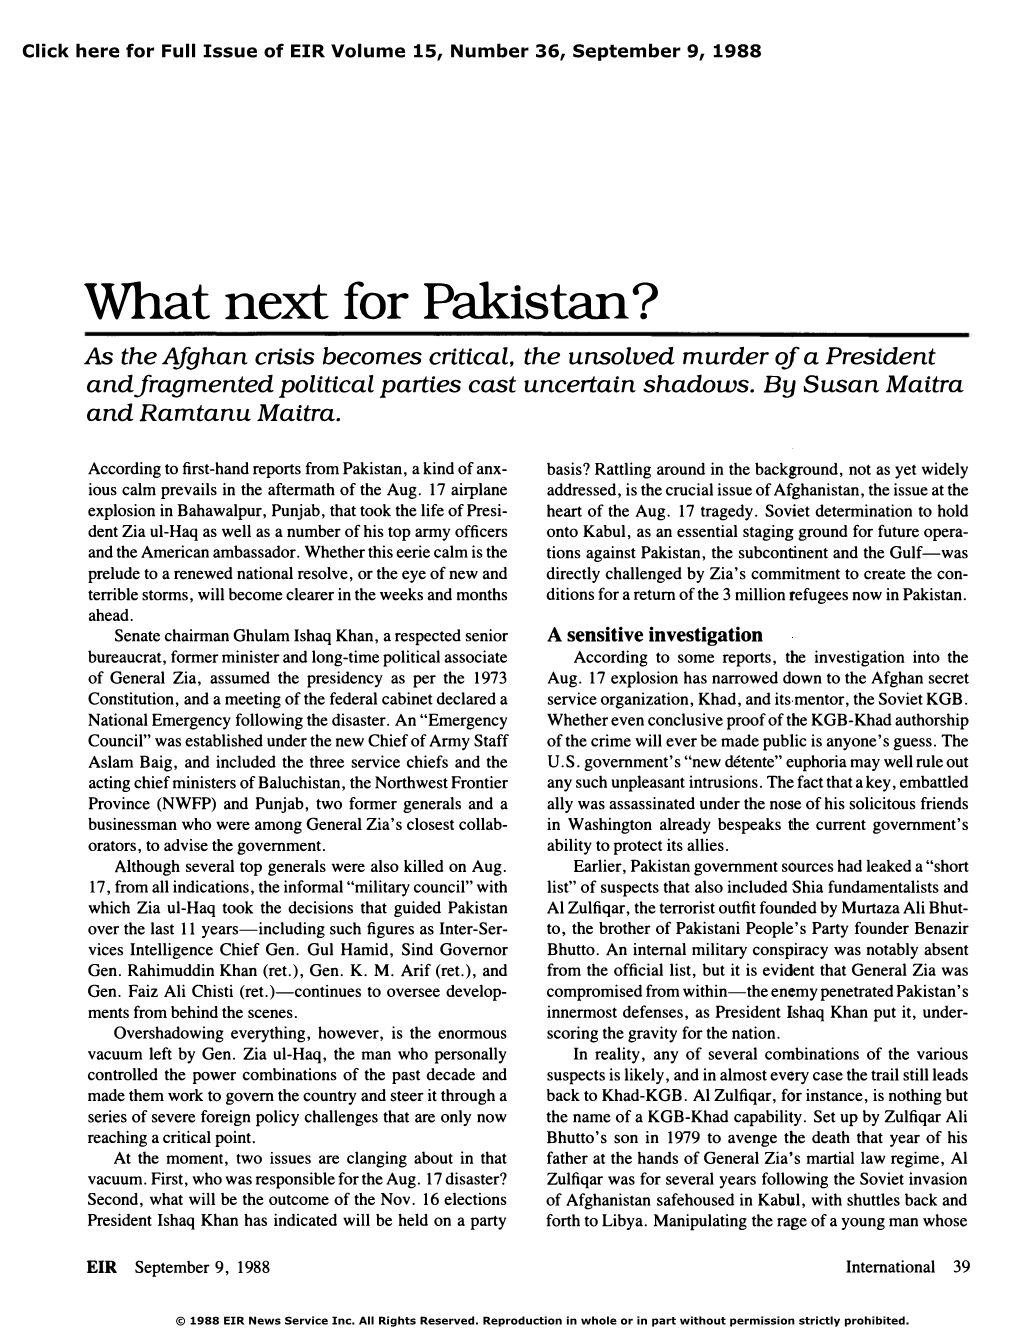 What Next for Pakistan?